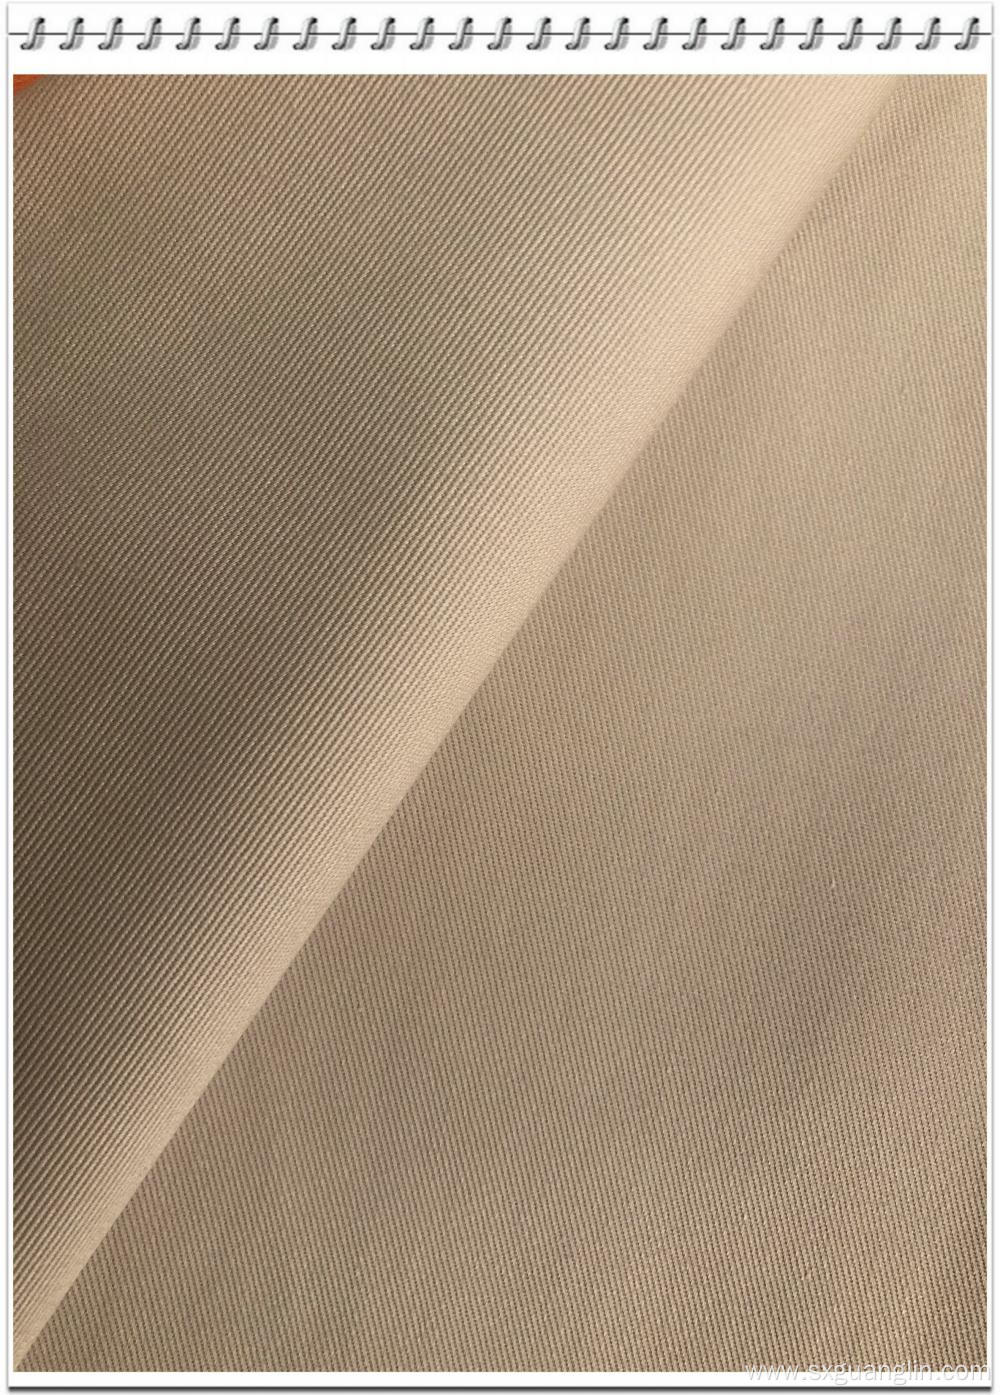 Polyester Cotton Twill Dyed Fabric For Workes